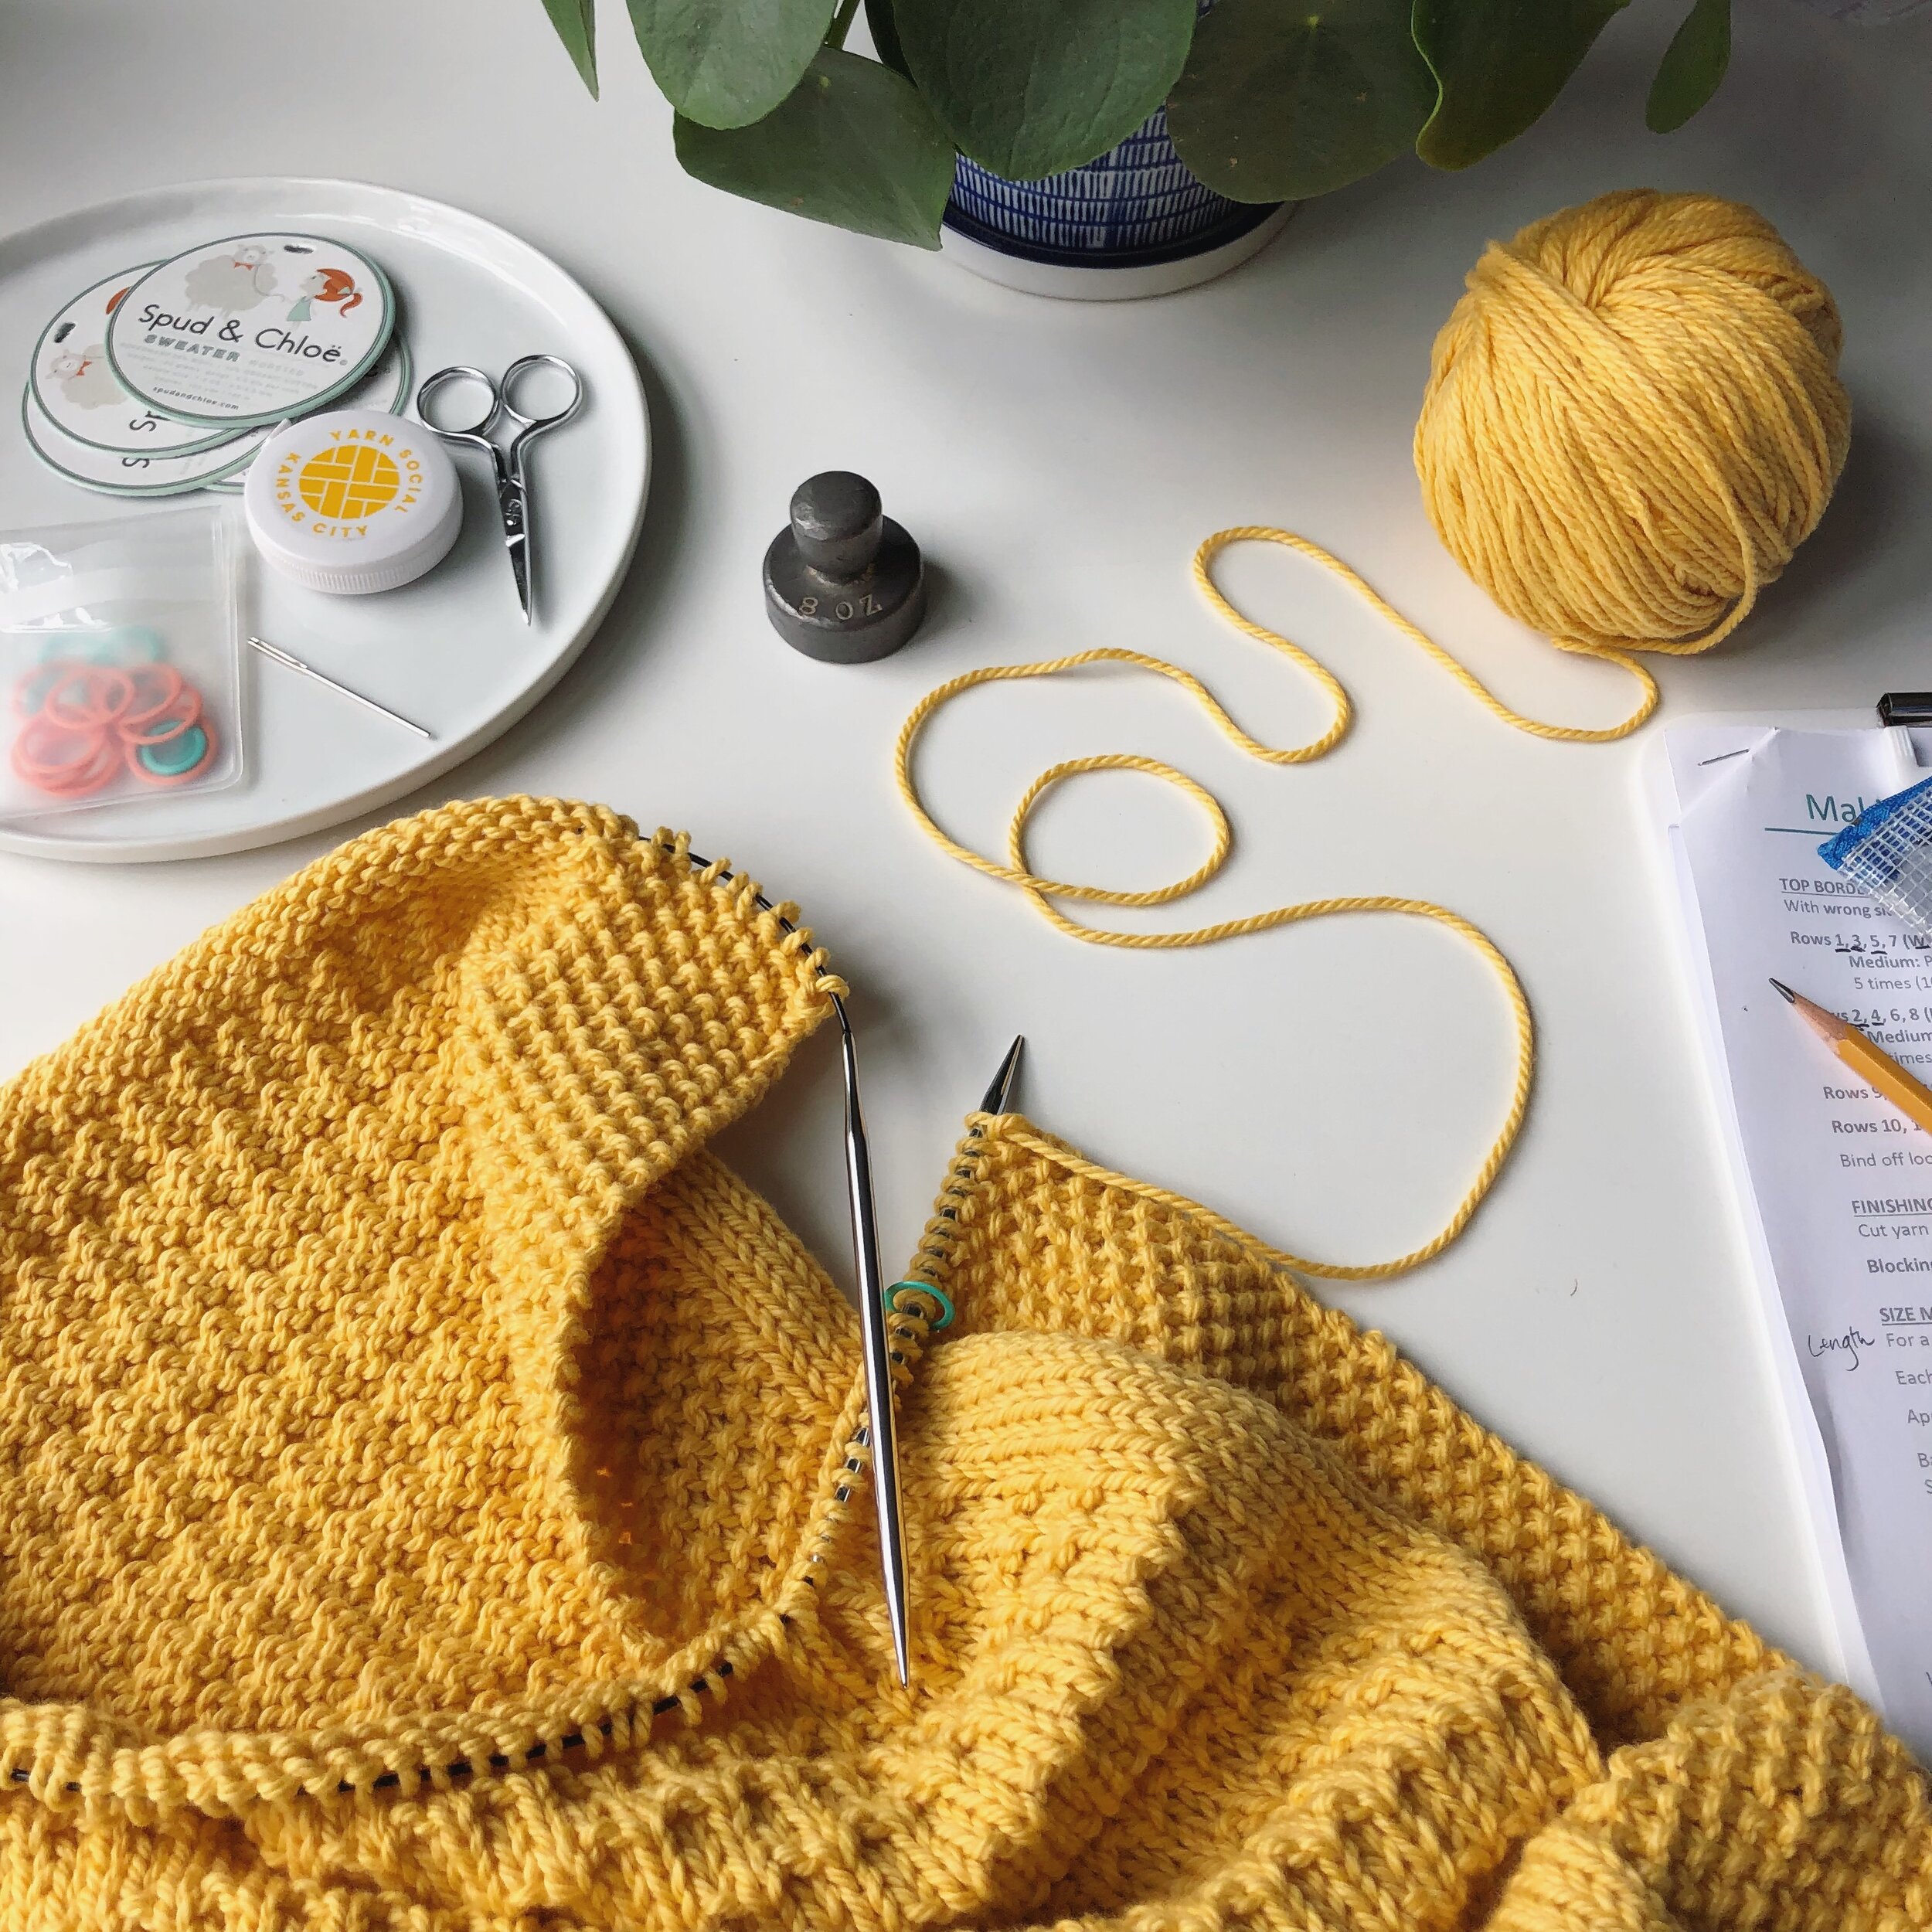 Is it okay to fly with knitting needles? : r/knitting